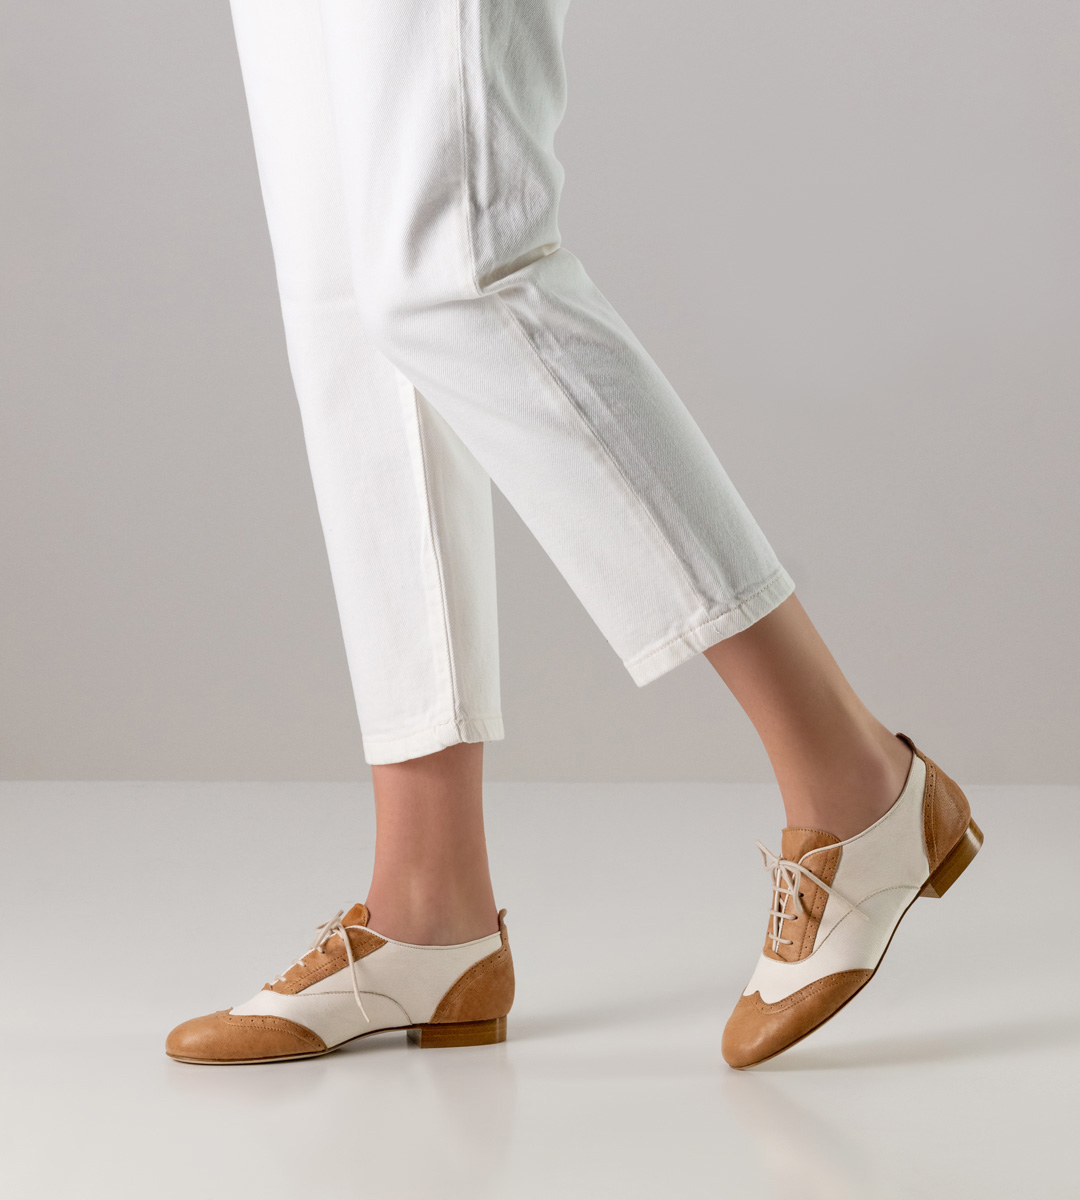 Swing ladies' dance shoe in beige-white by Werner Kern with leather sole